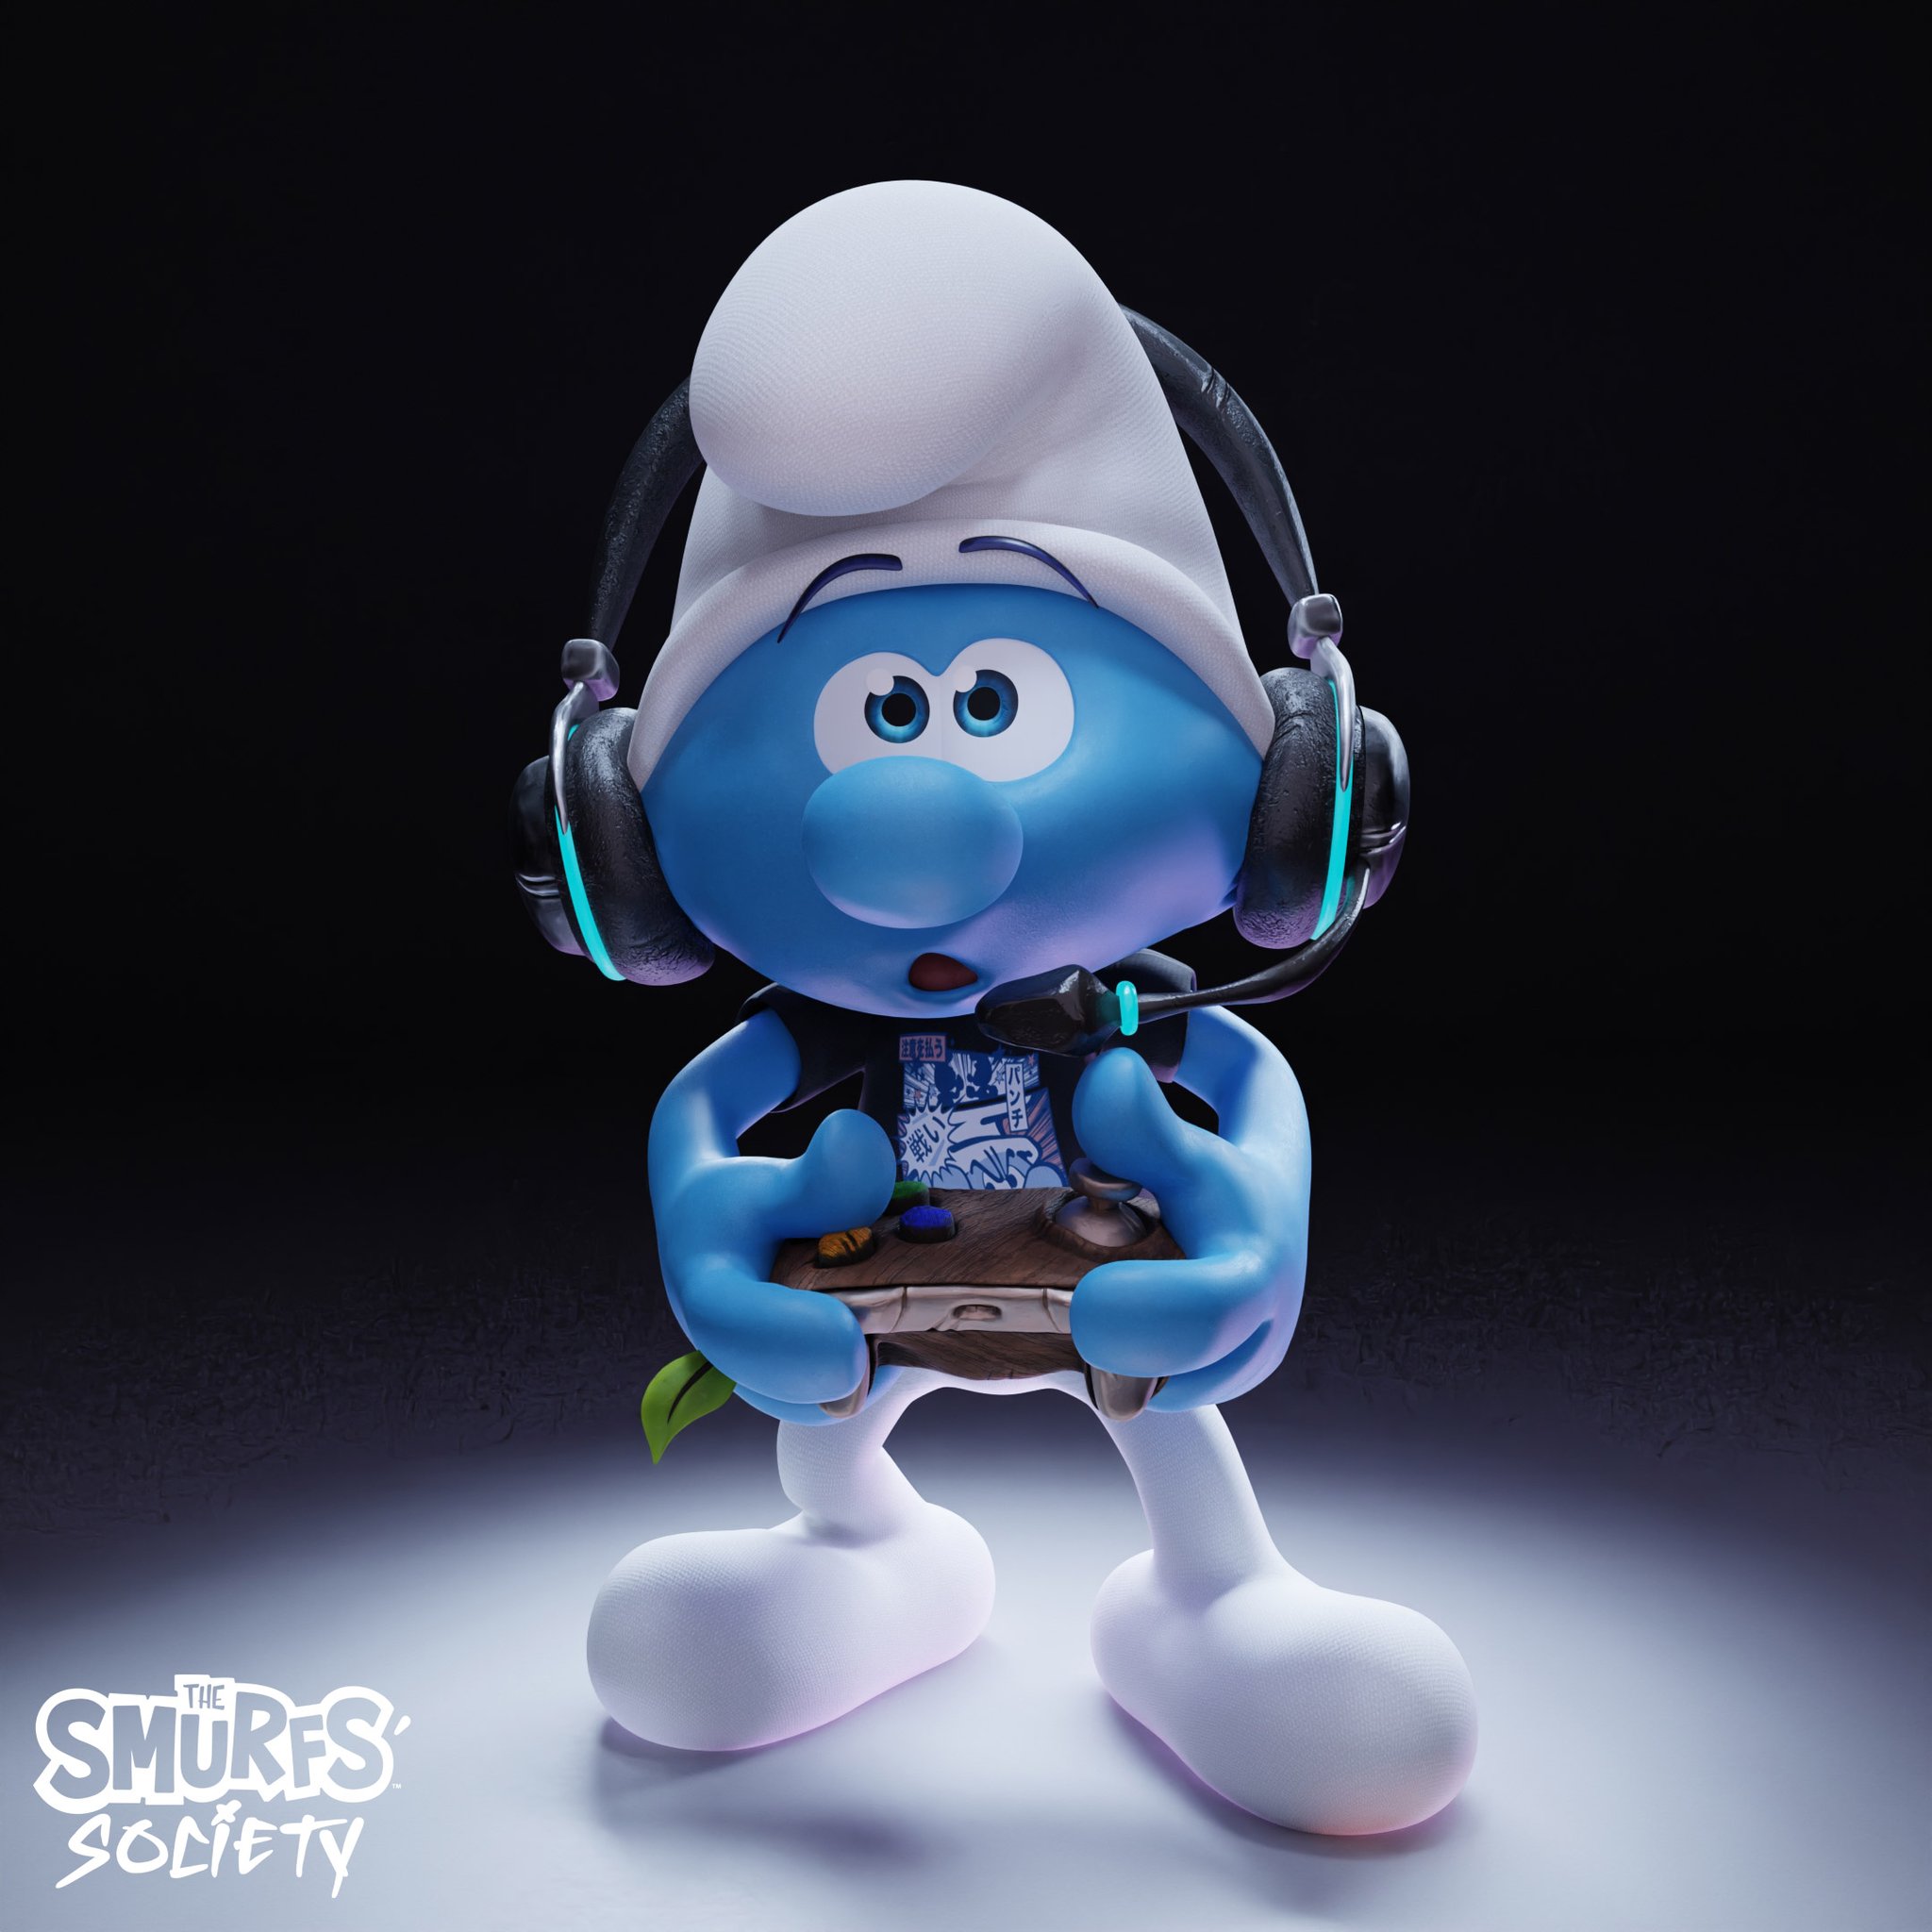 Smurfs Are Damaging the Gaming Community